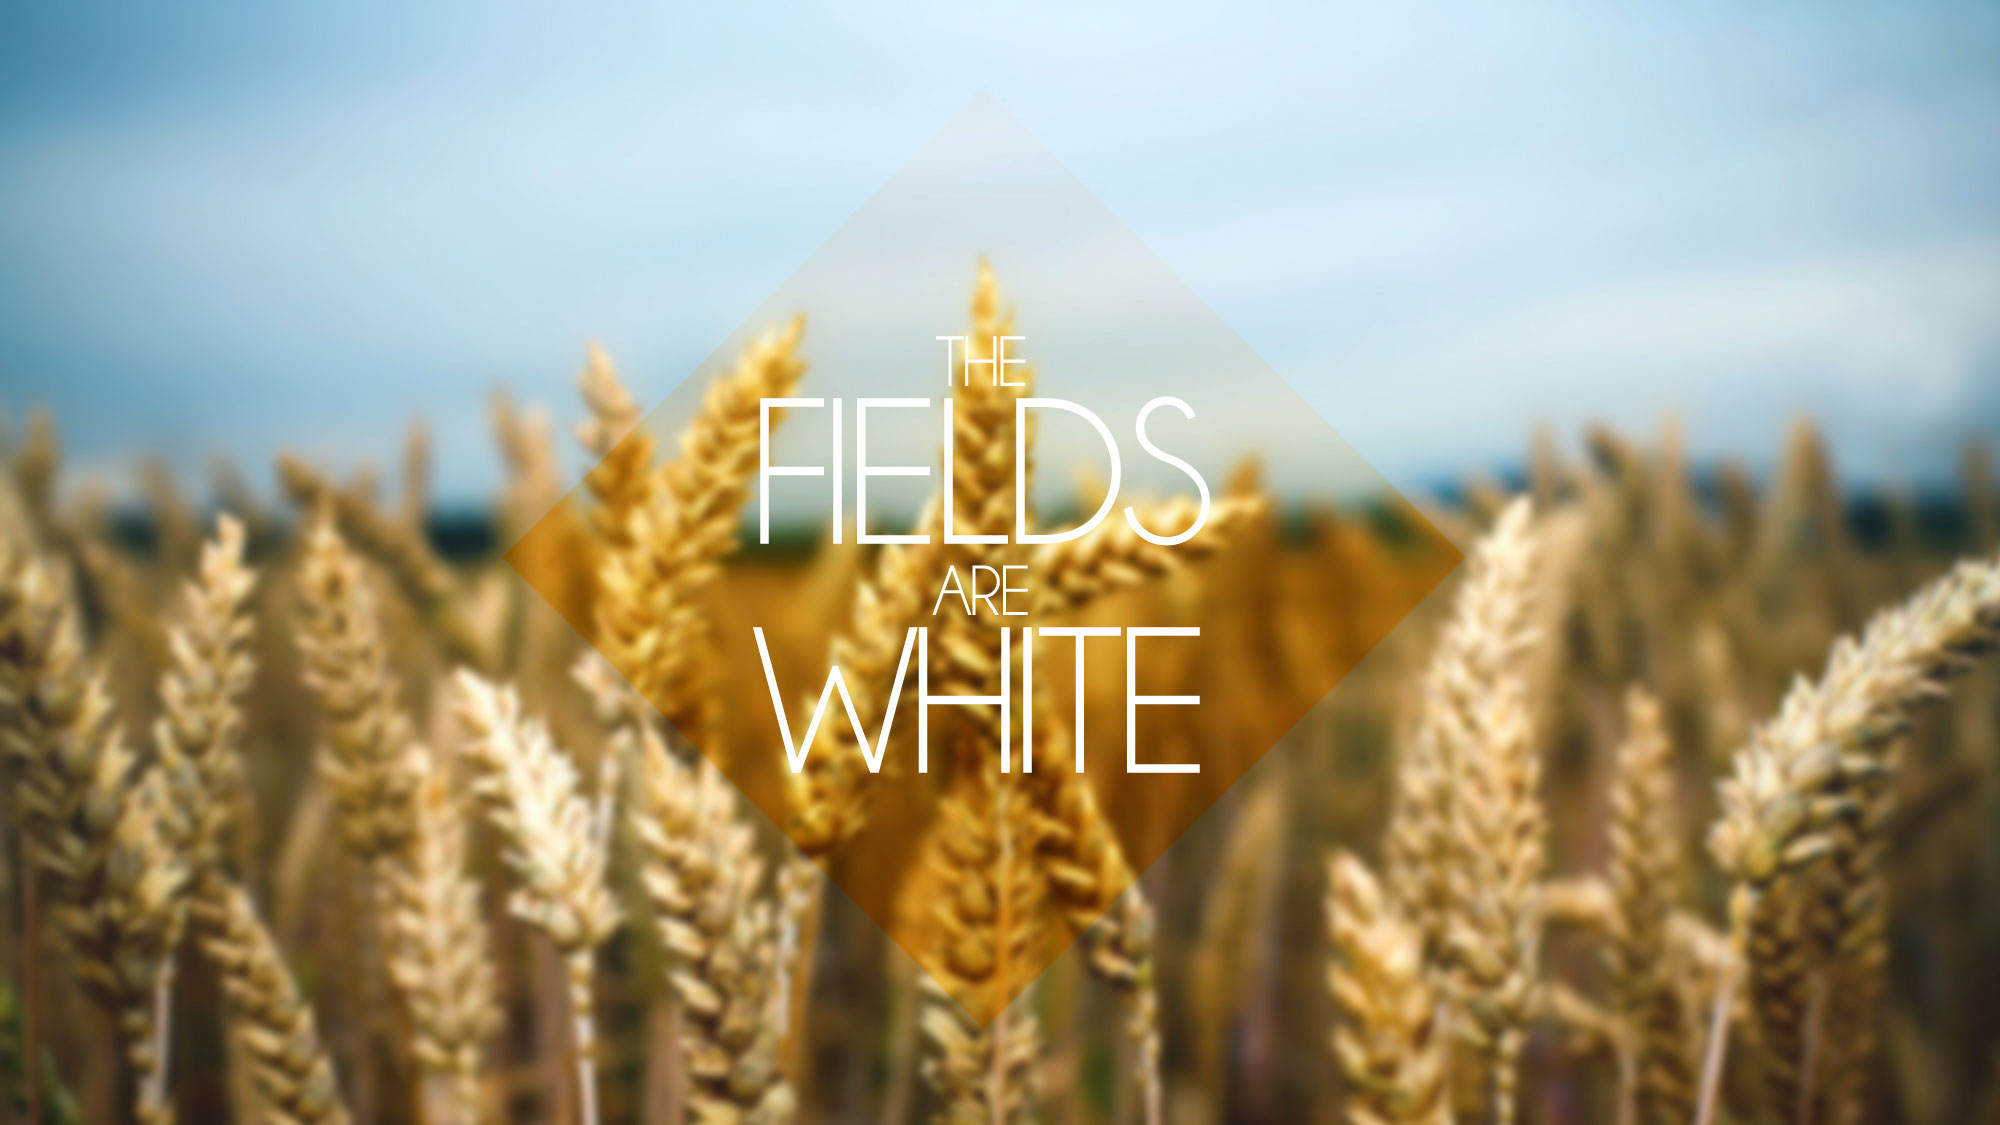 The Fields Are White